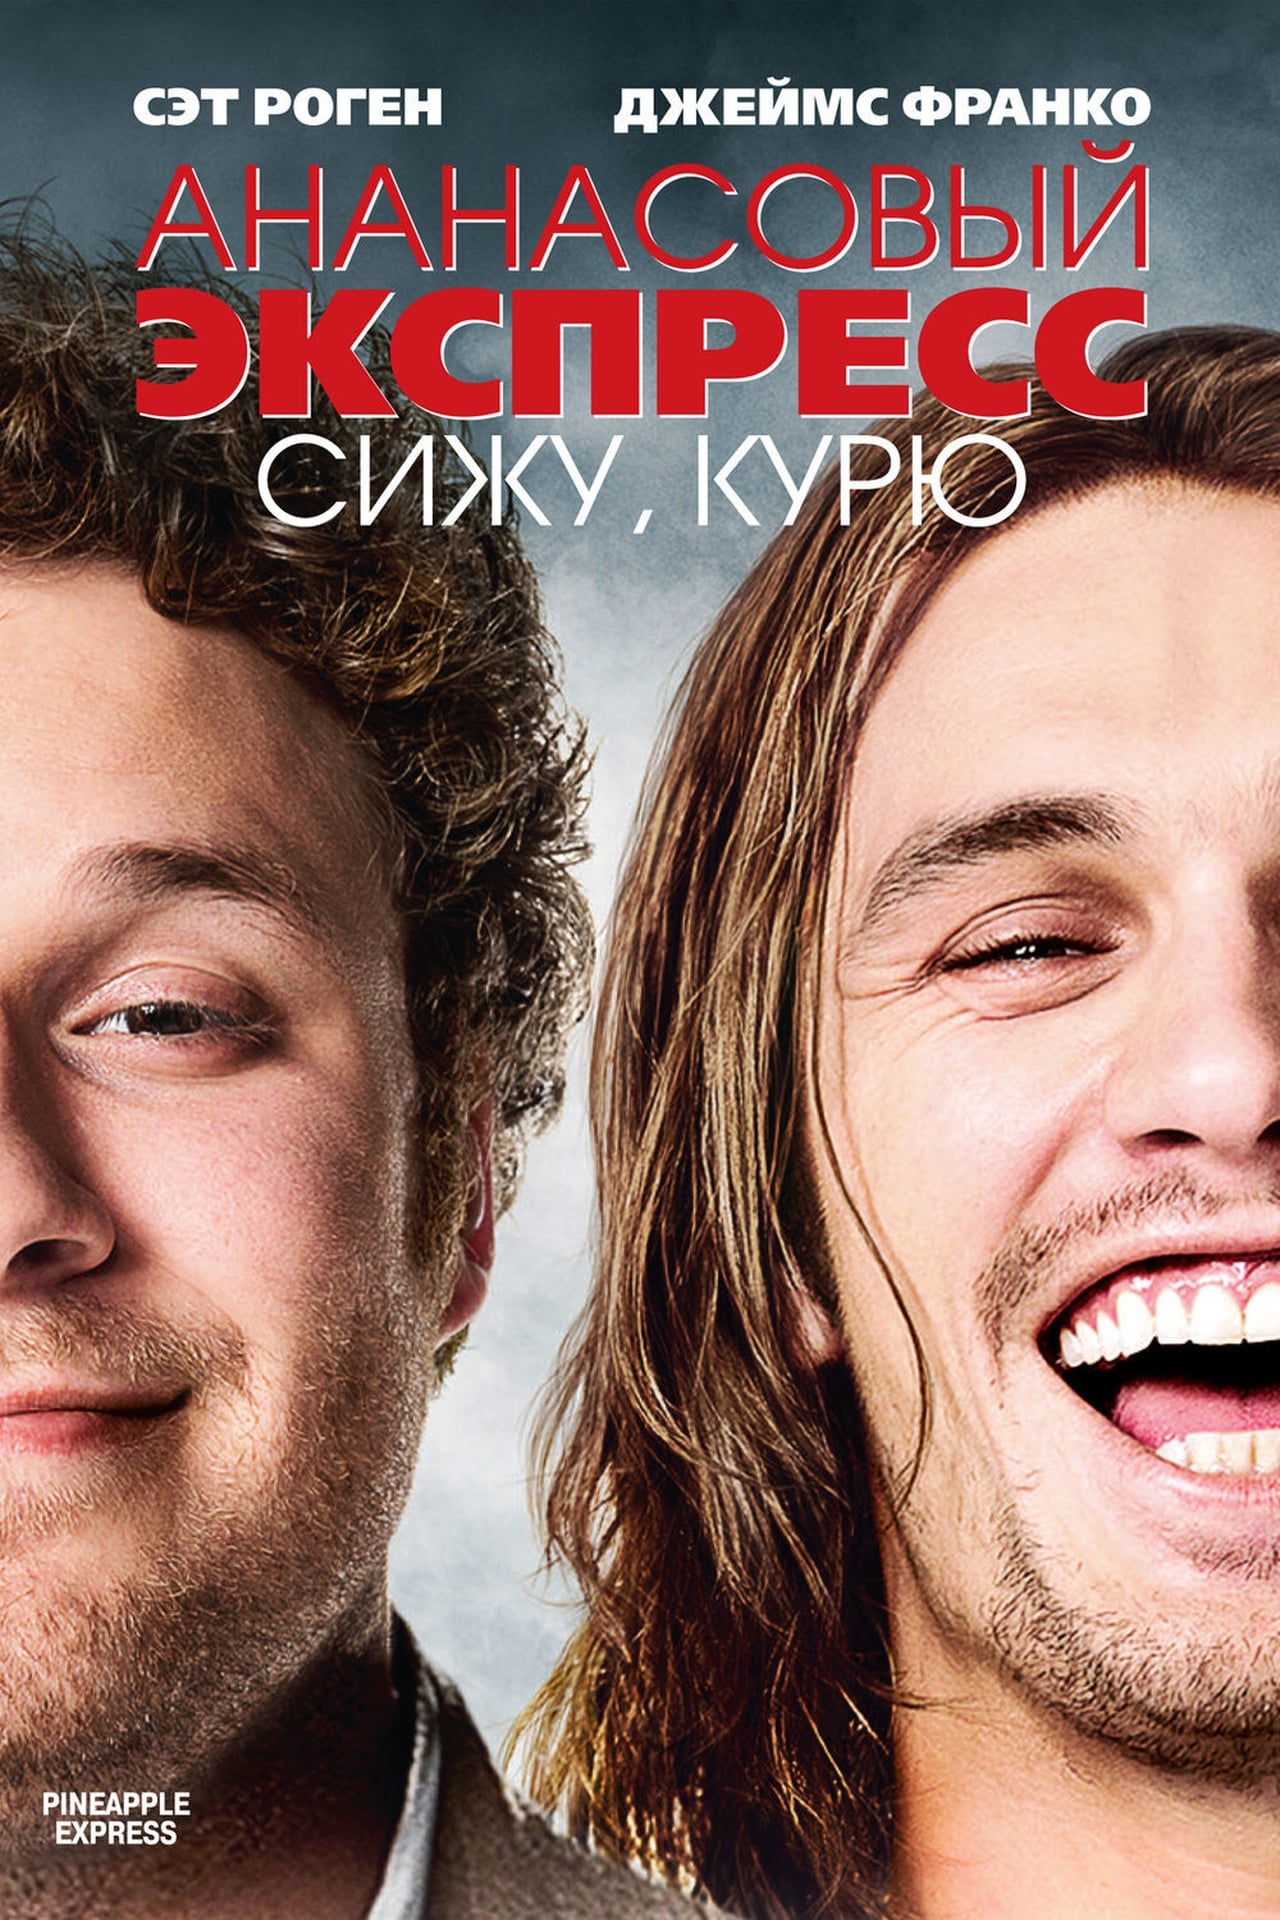 watch pineapple express for free